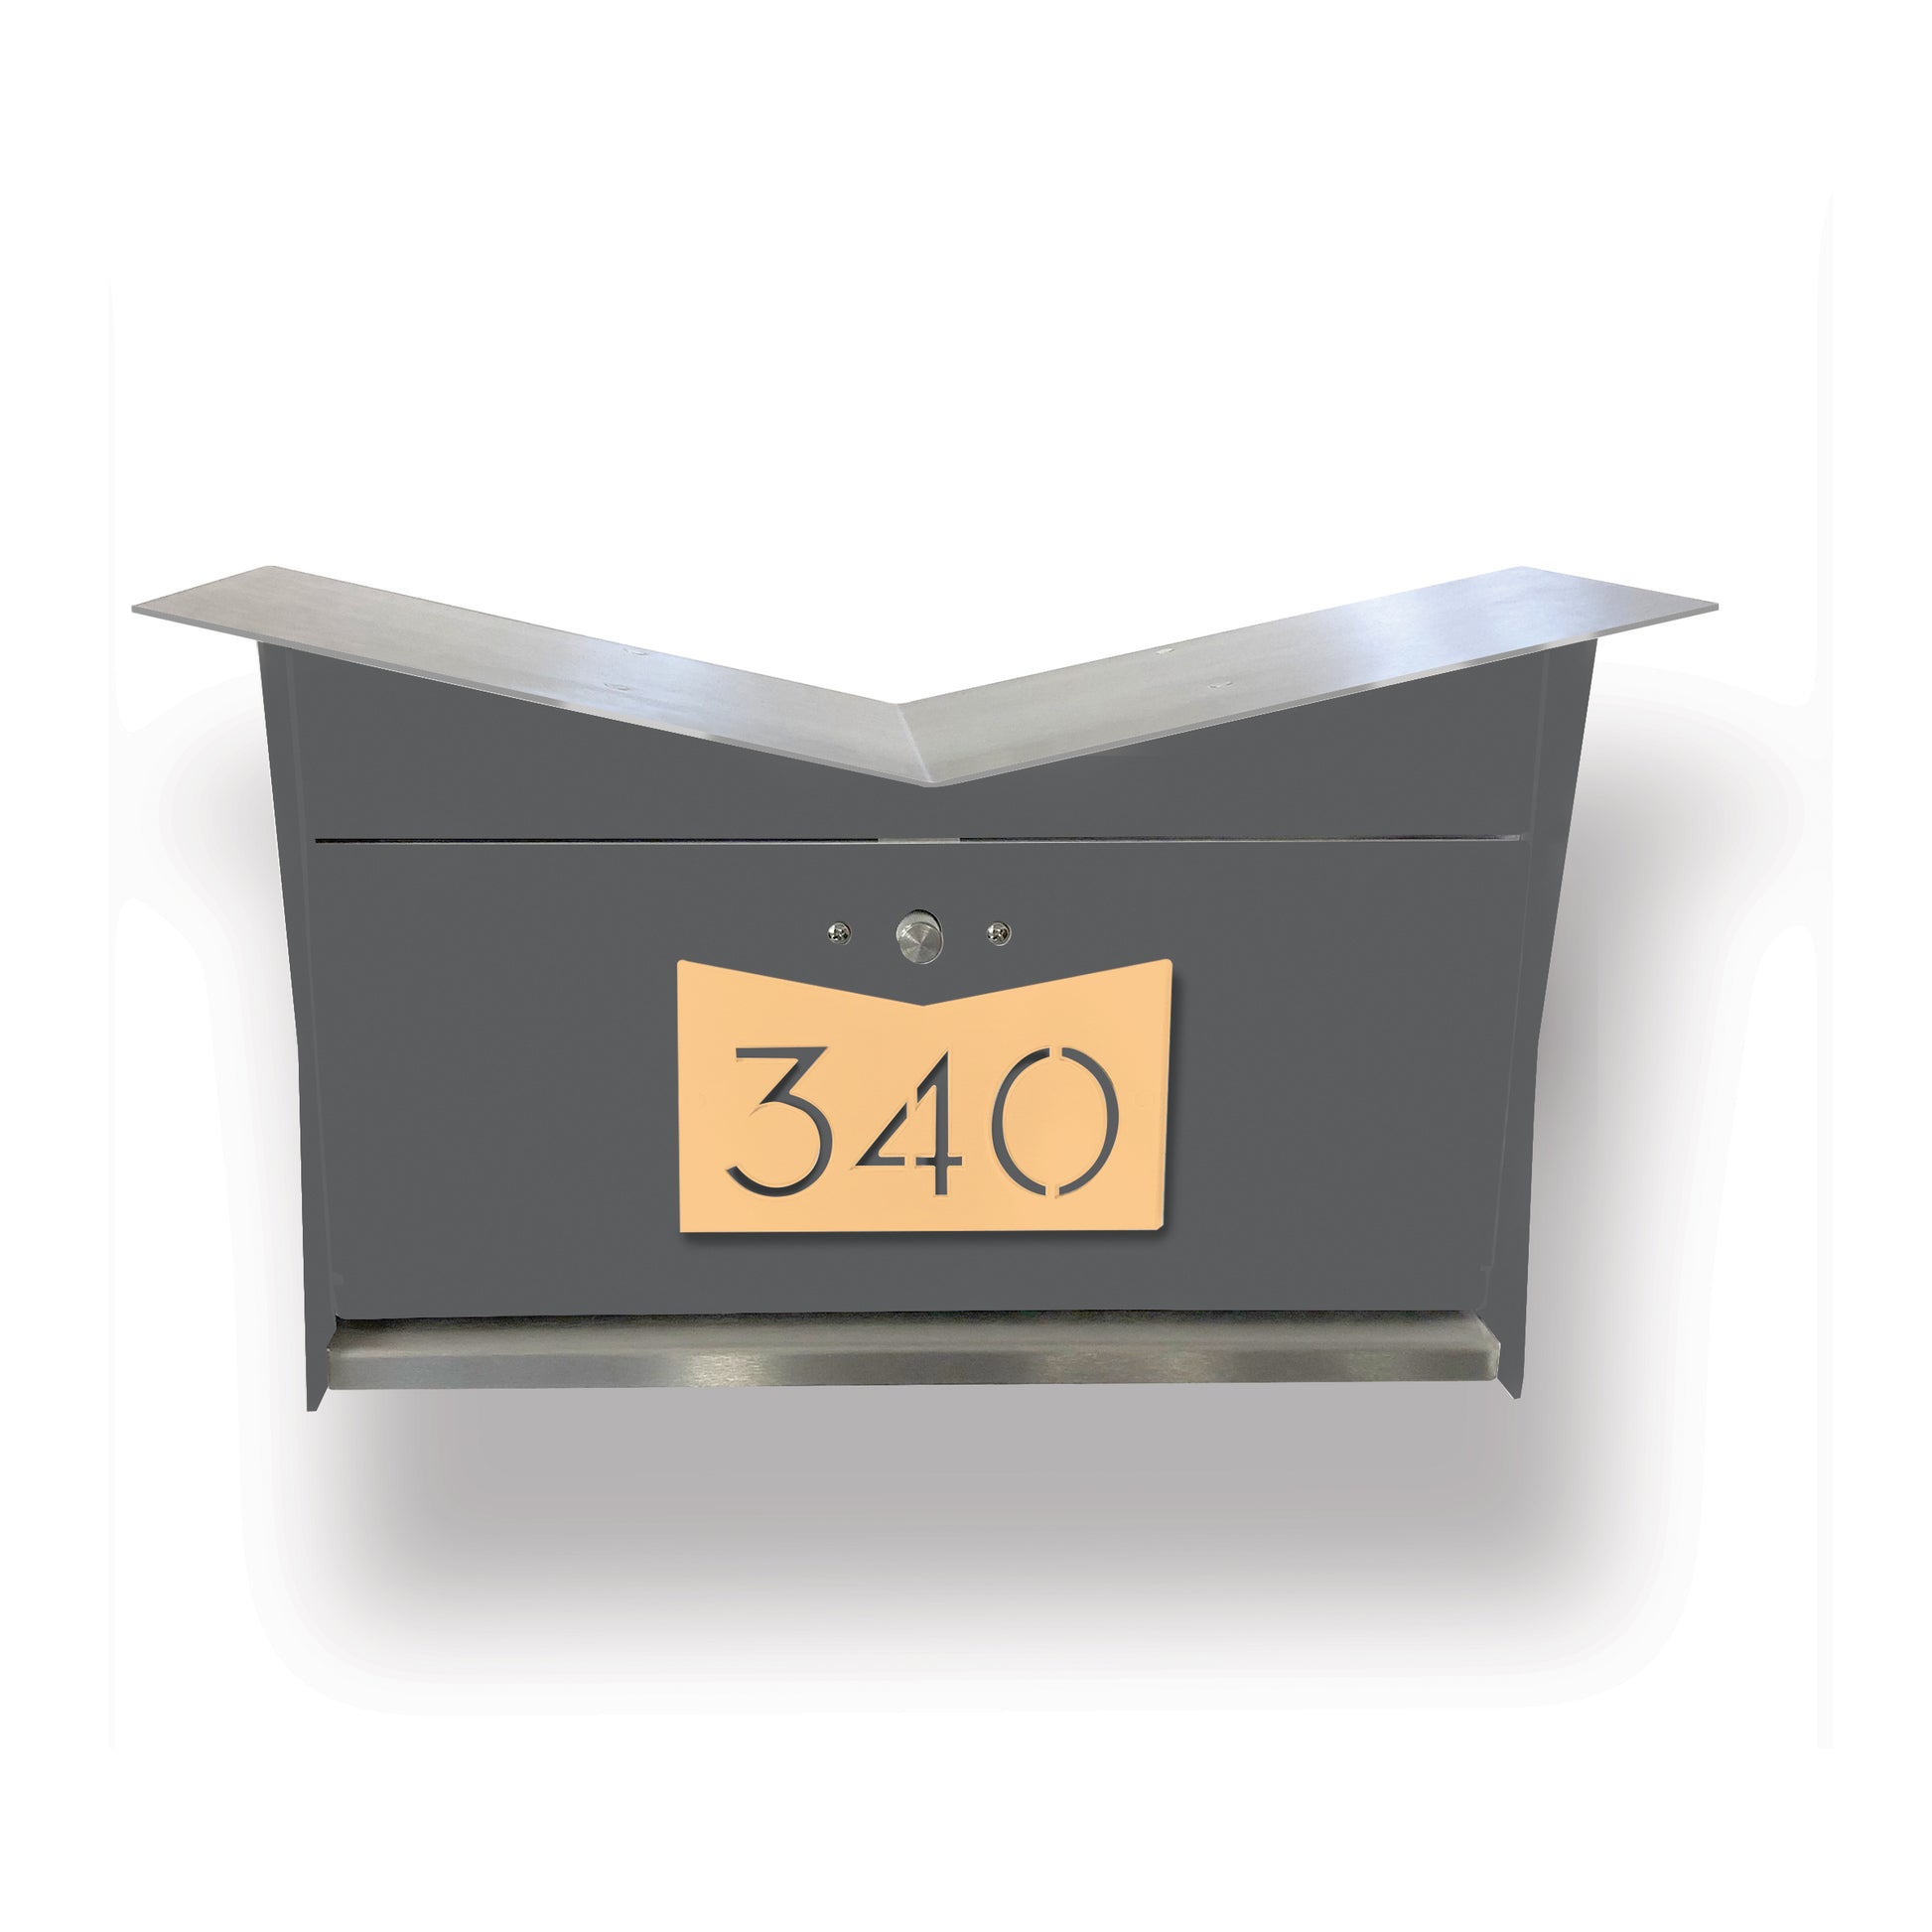 Wall Mount Mailbox | ButterFly Box in designer gray and sandy beige